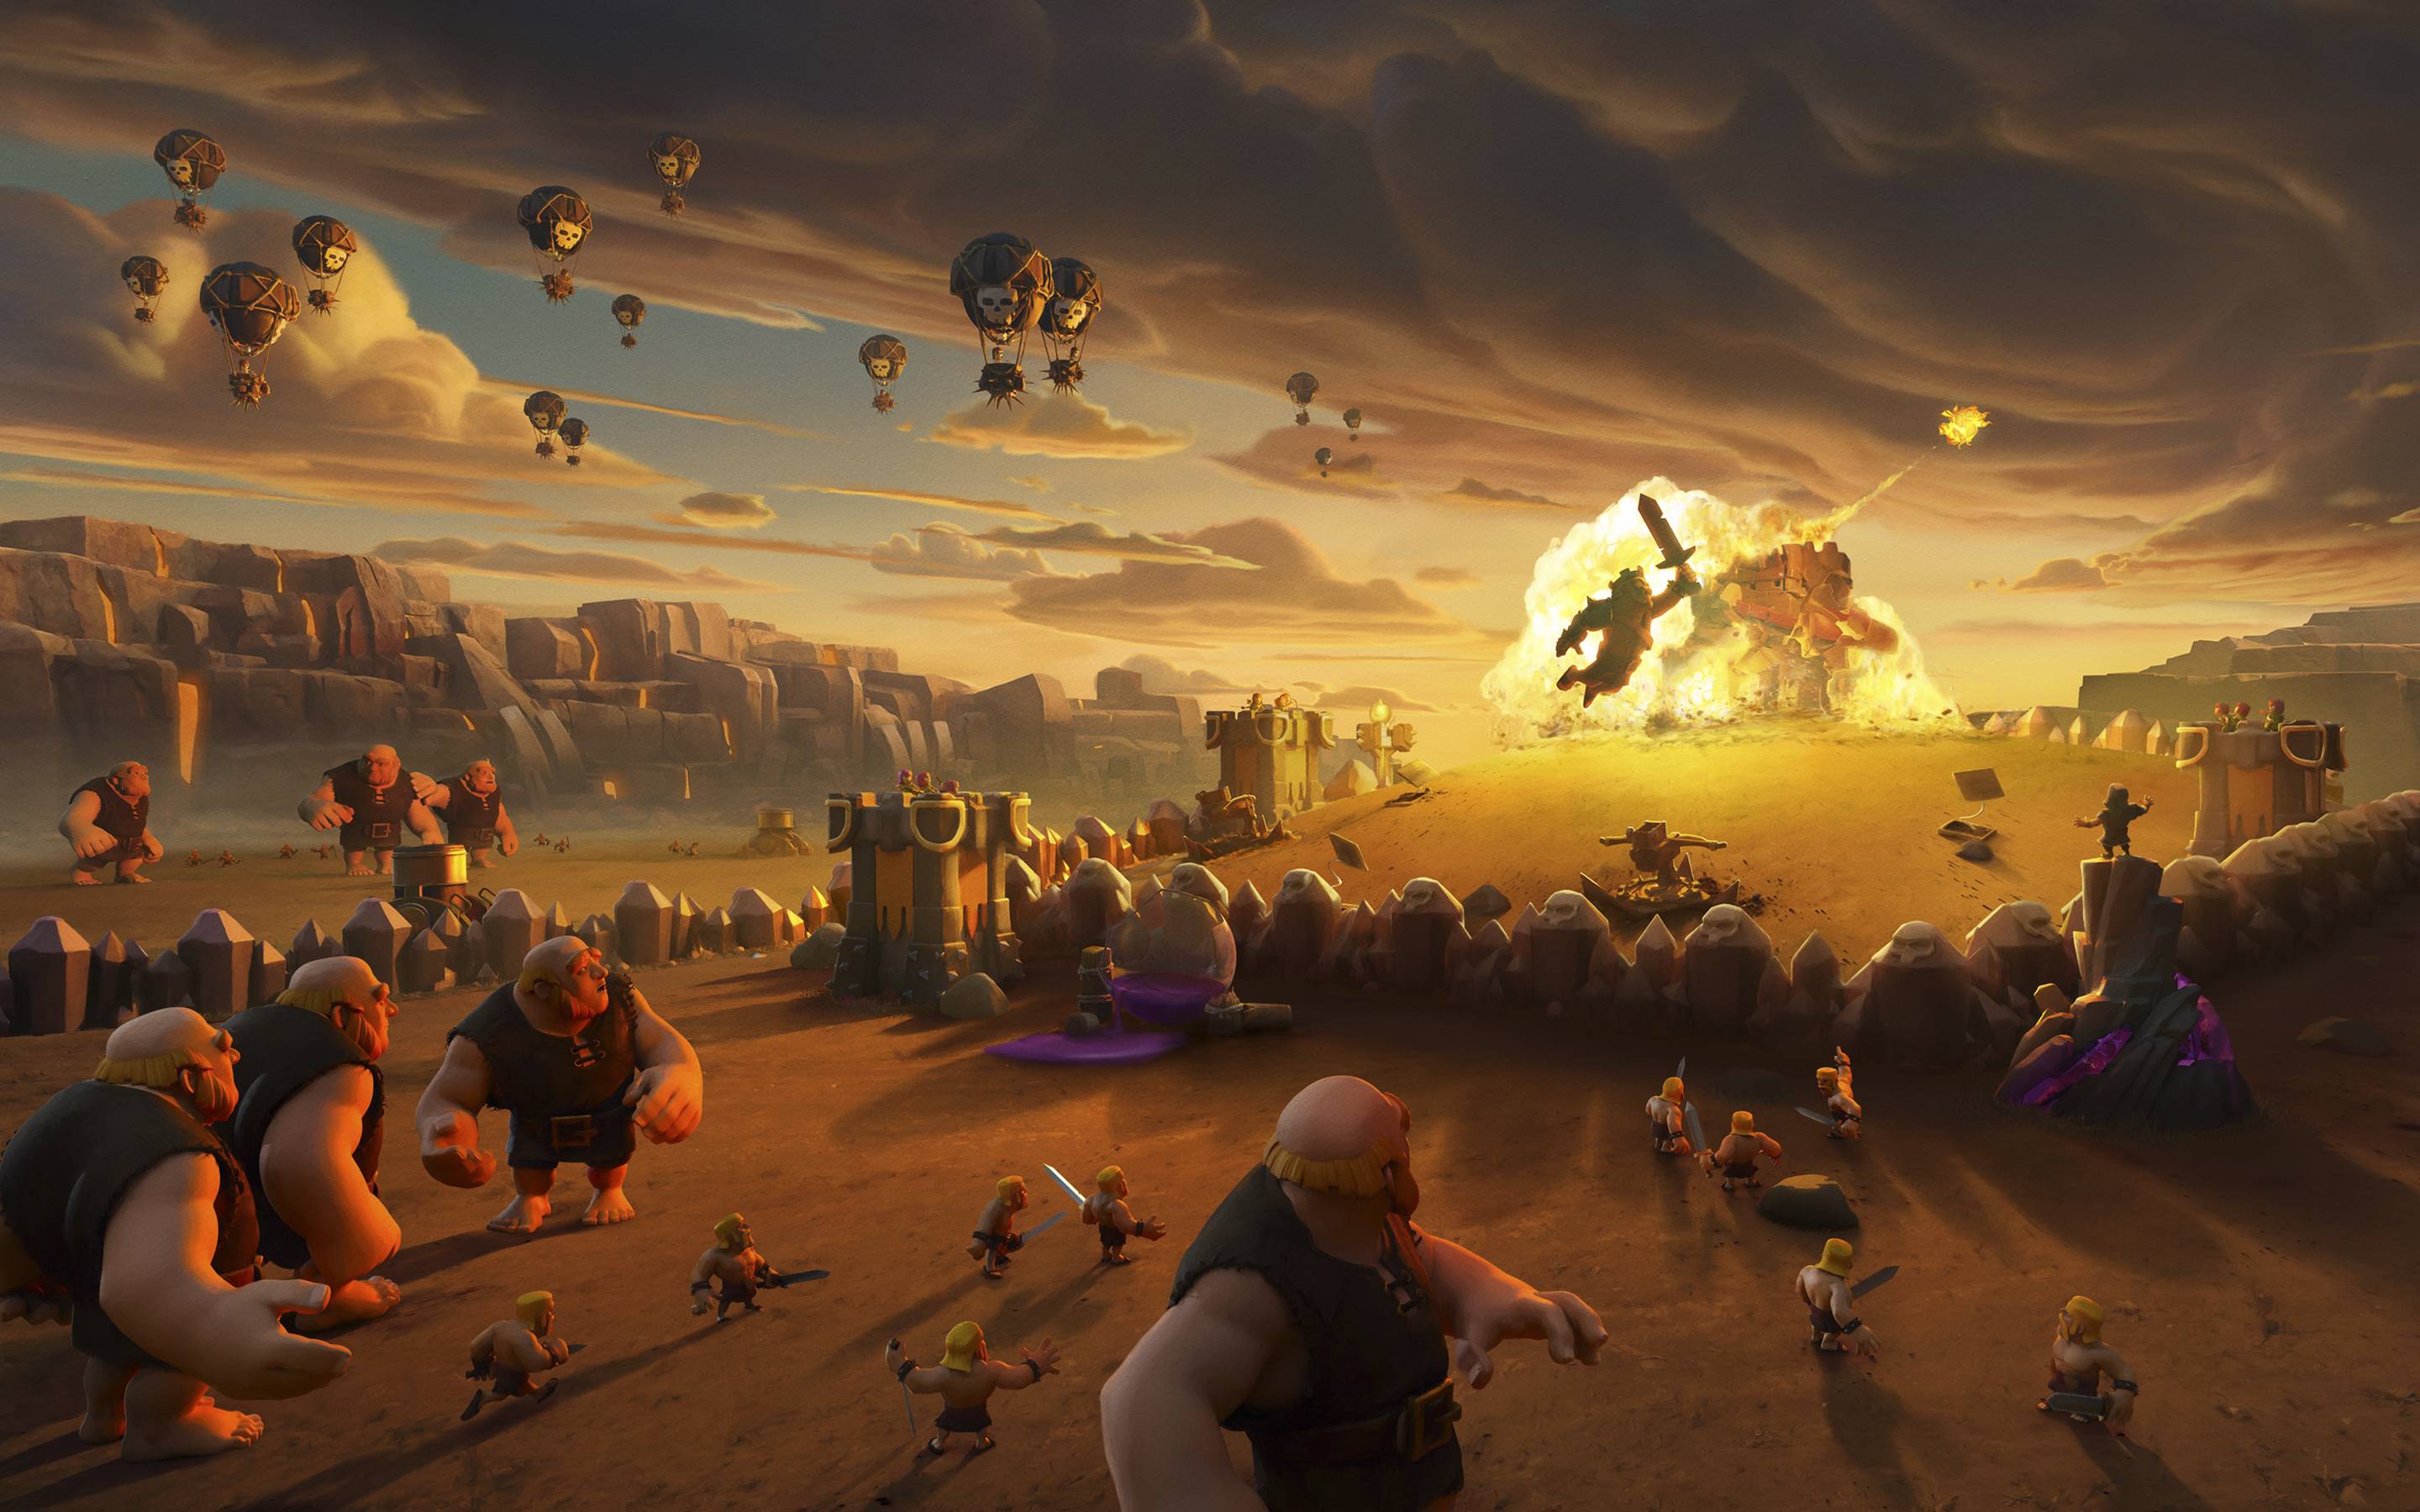 Clash of clans game widescreen wallpaper x px